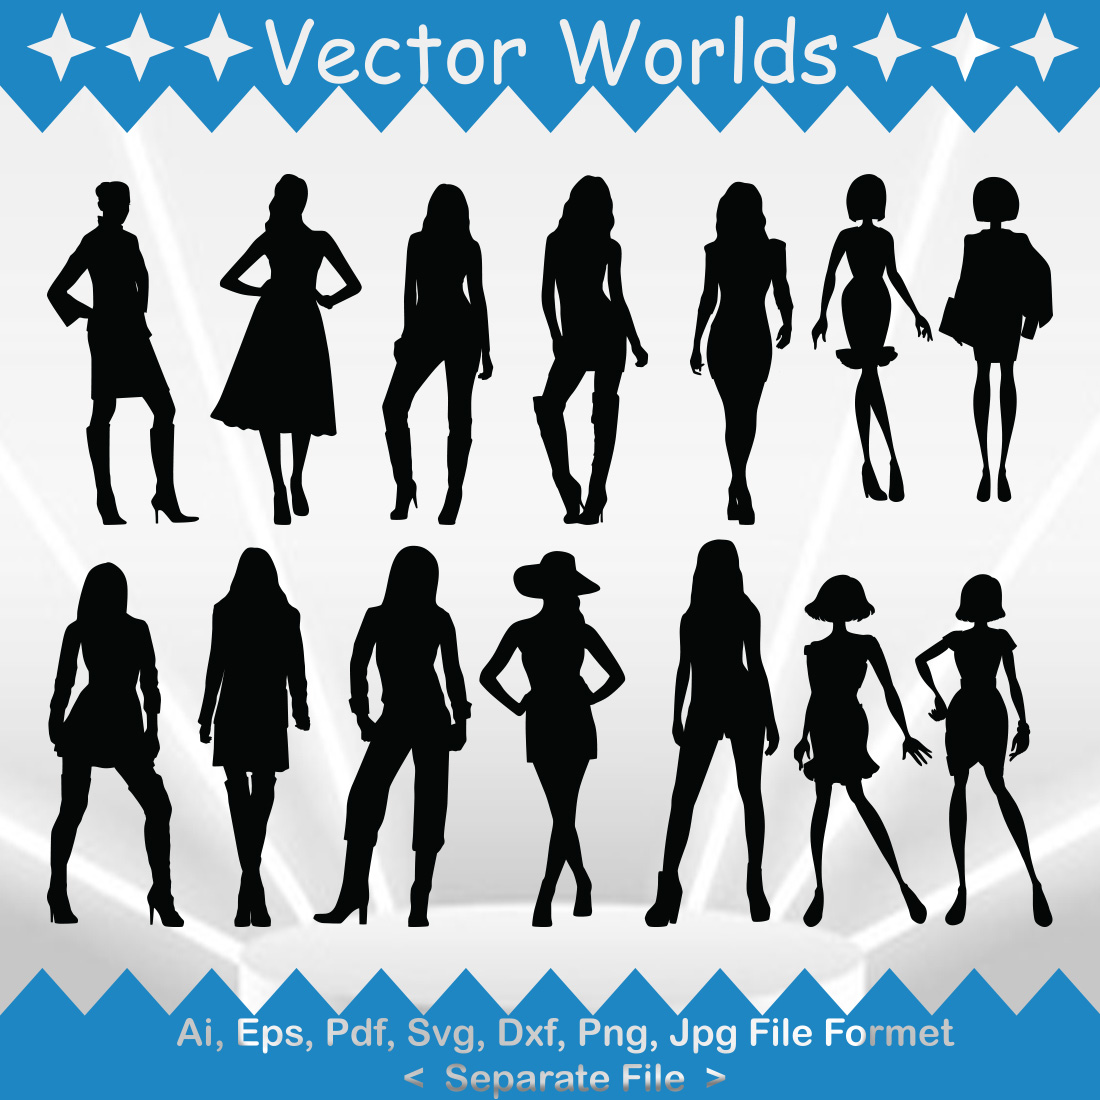 A selection of vector elegant images of fashionable women silhouettes.